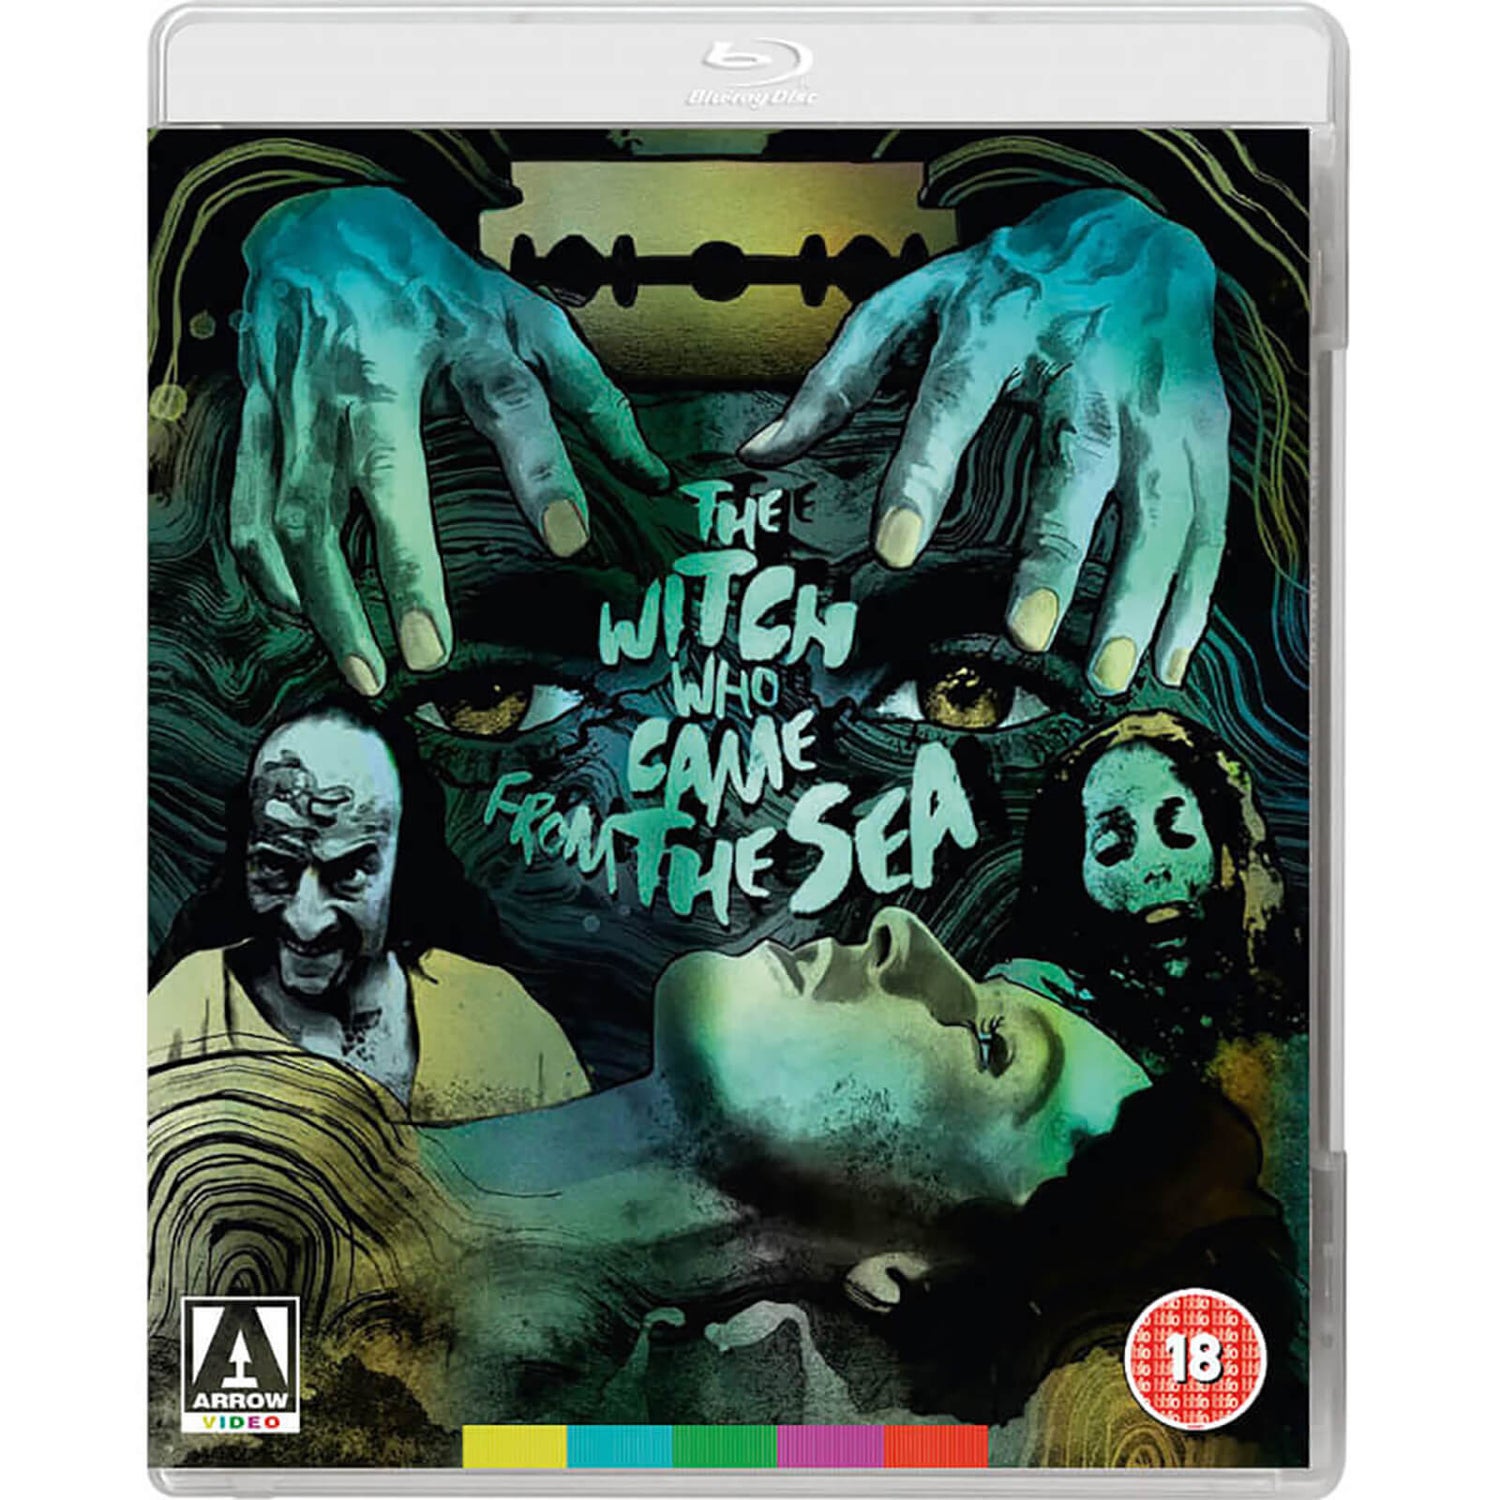 The Witch Who Came From The Sea Blu-ray